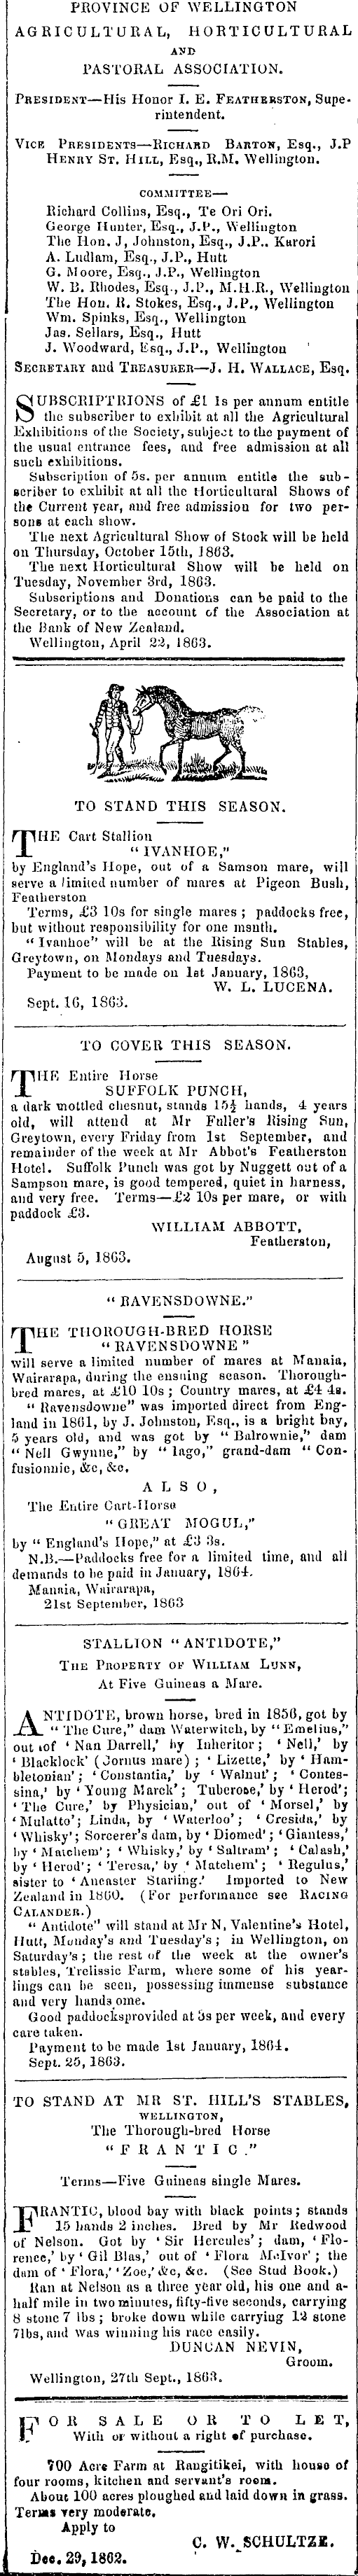 Papers Past Newspapers Wellington Independent 3 October 1863 Page 1 Advertisements Column 4